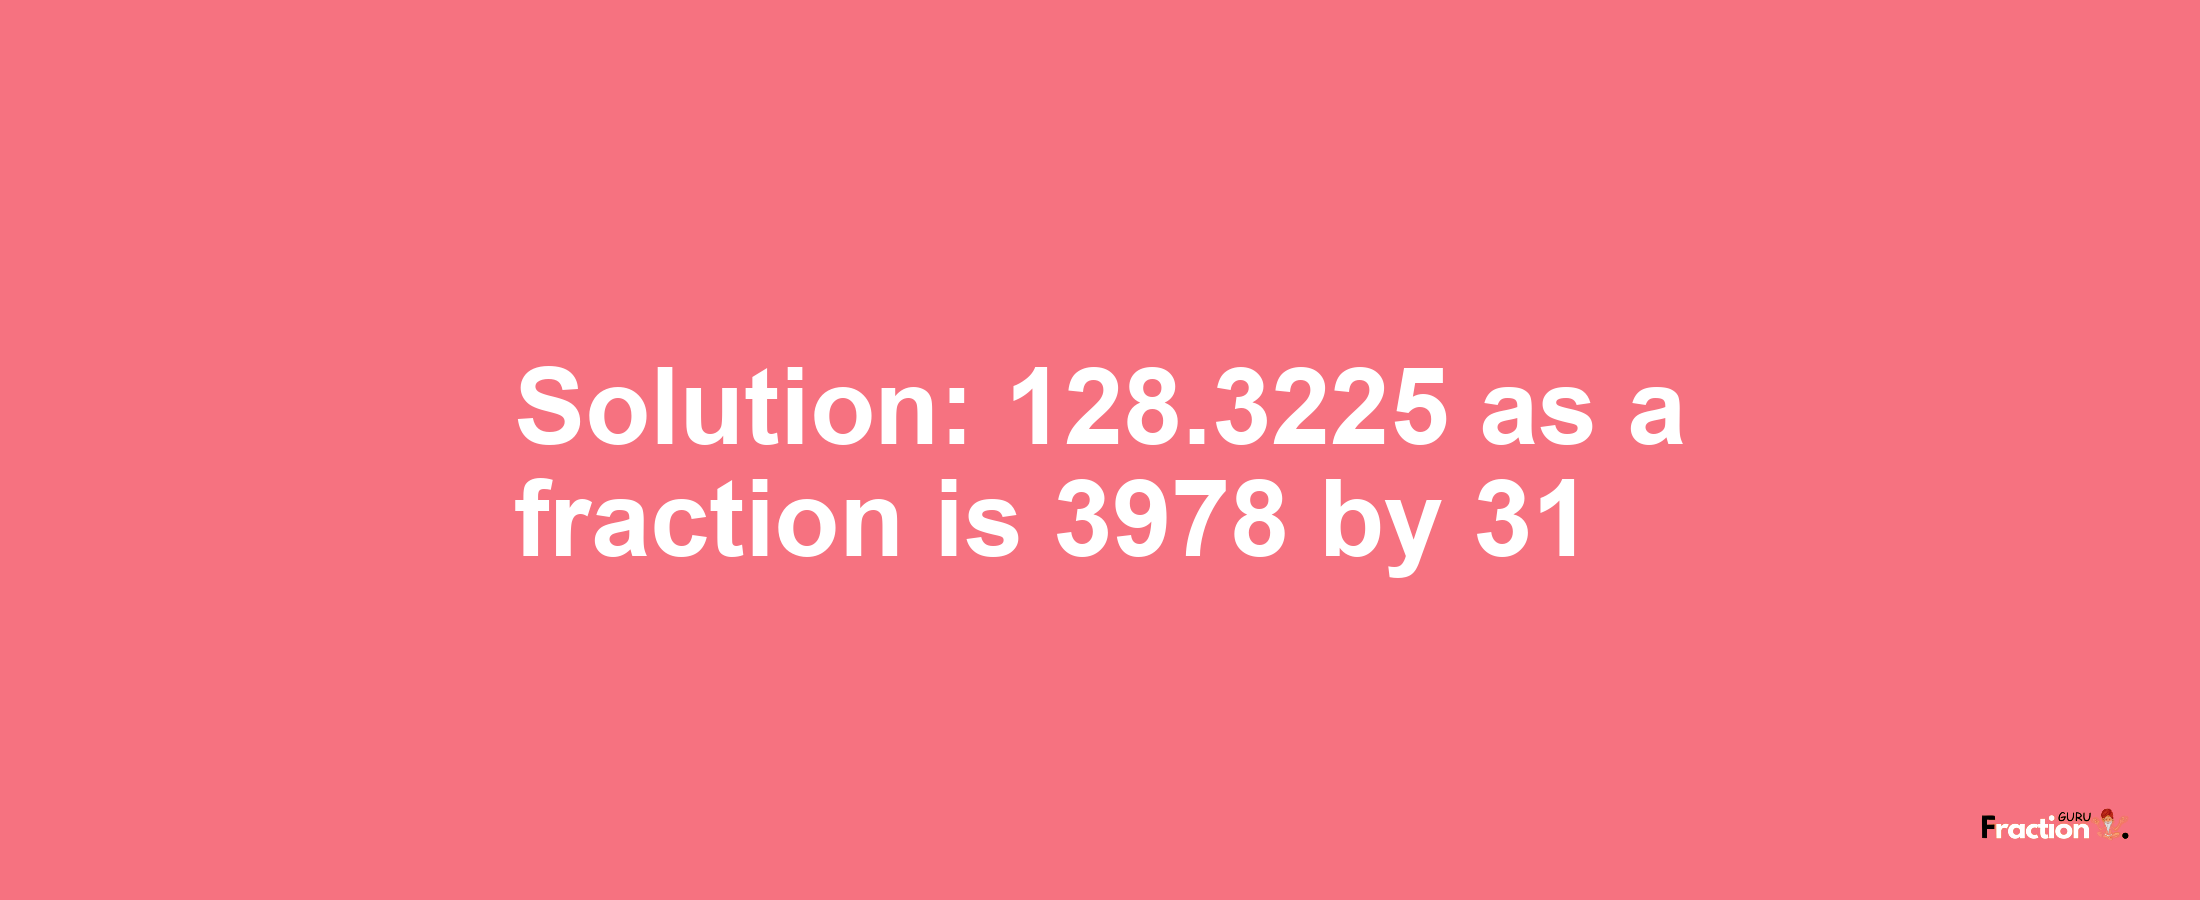 Solution:128.3225 as a fraction is 3978/31